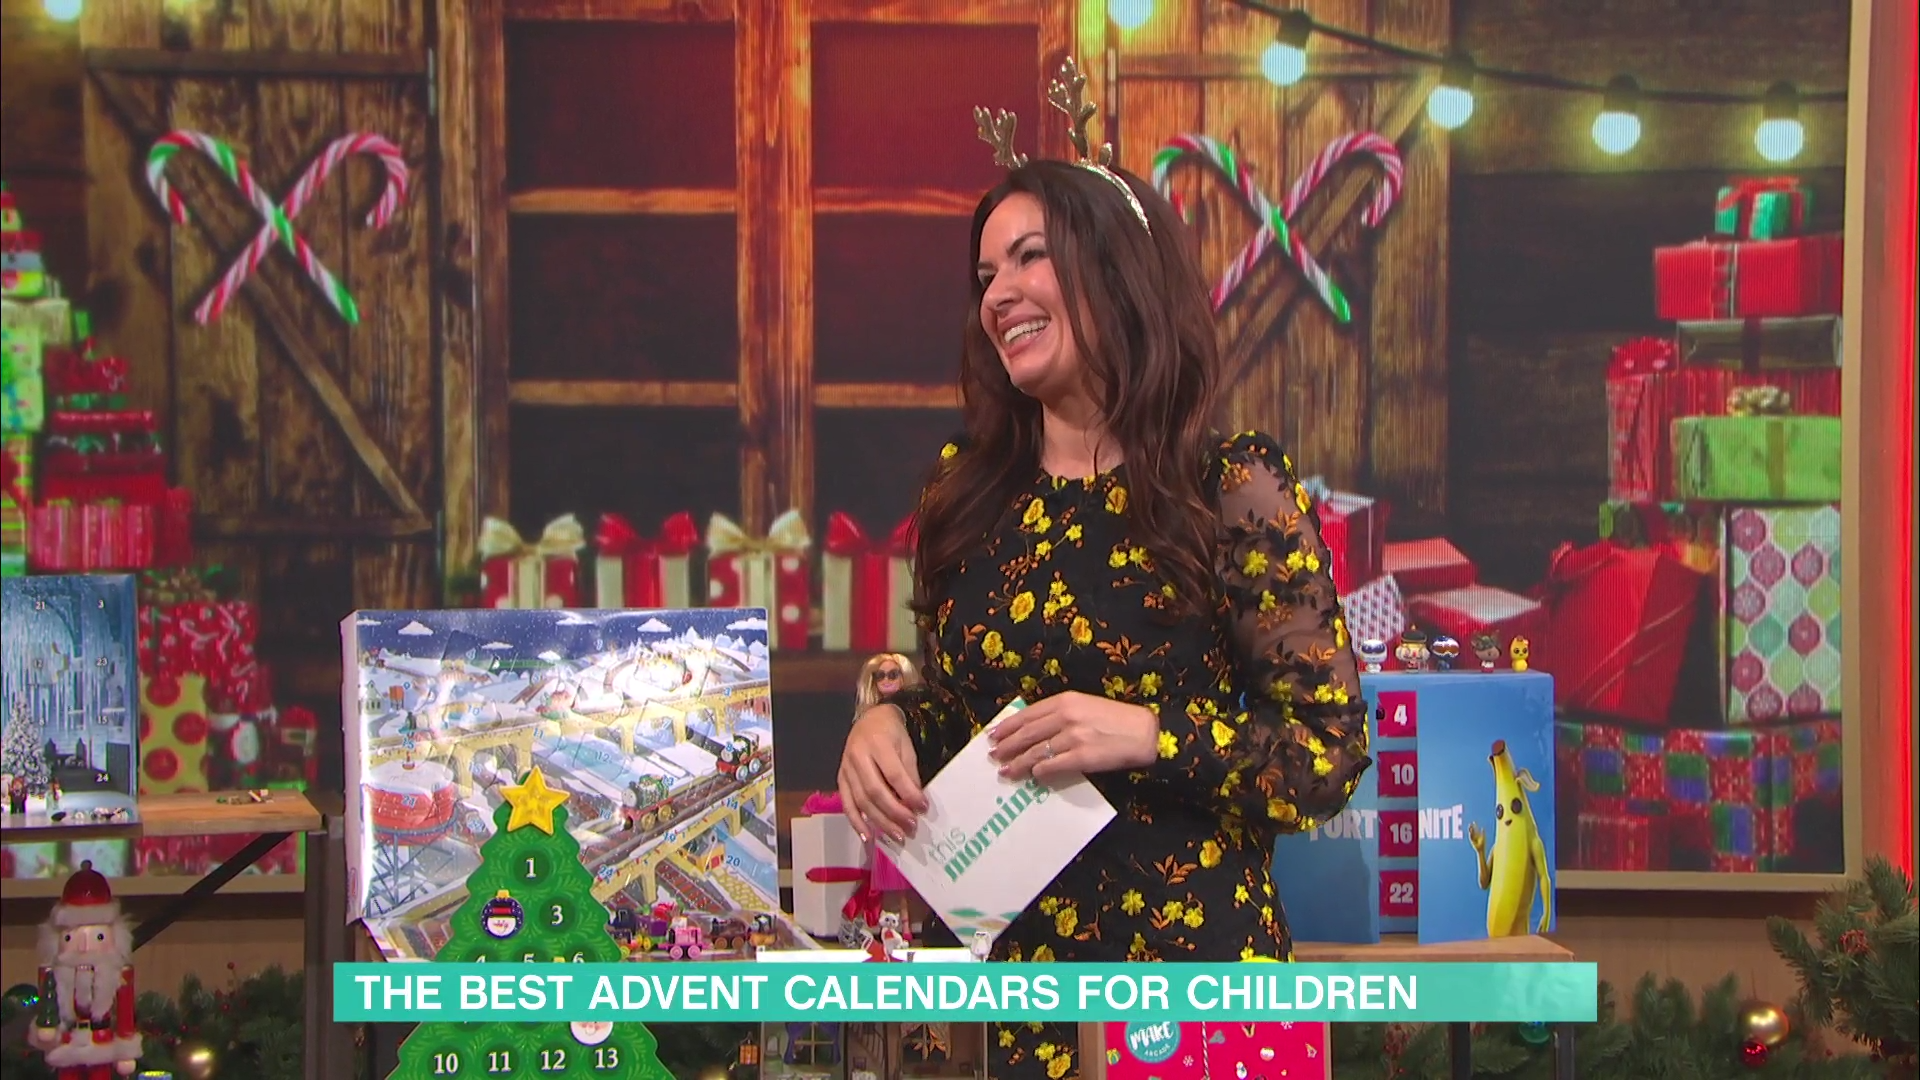 Best Advent Calendars For Kids 2020 Chocolate Toys And Crafts This Morning